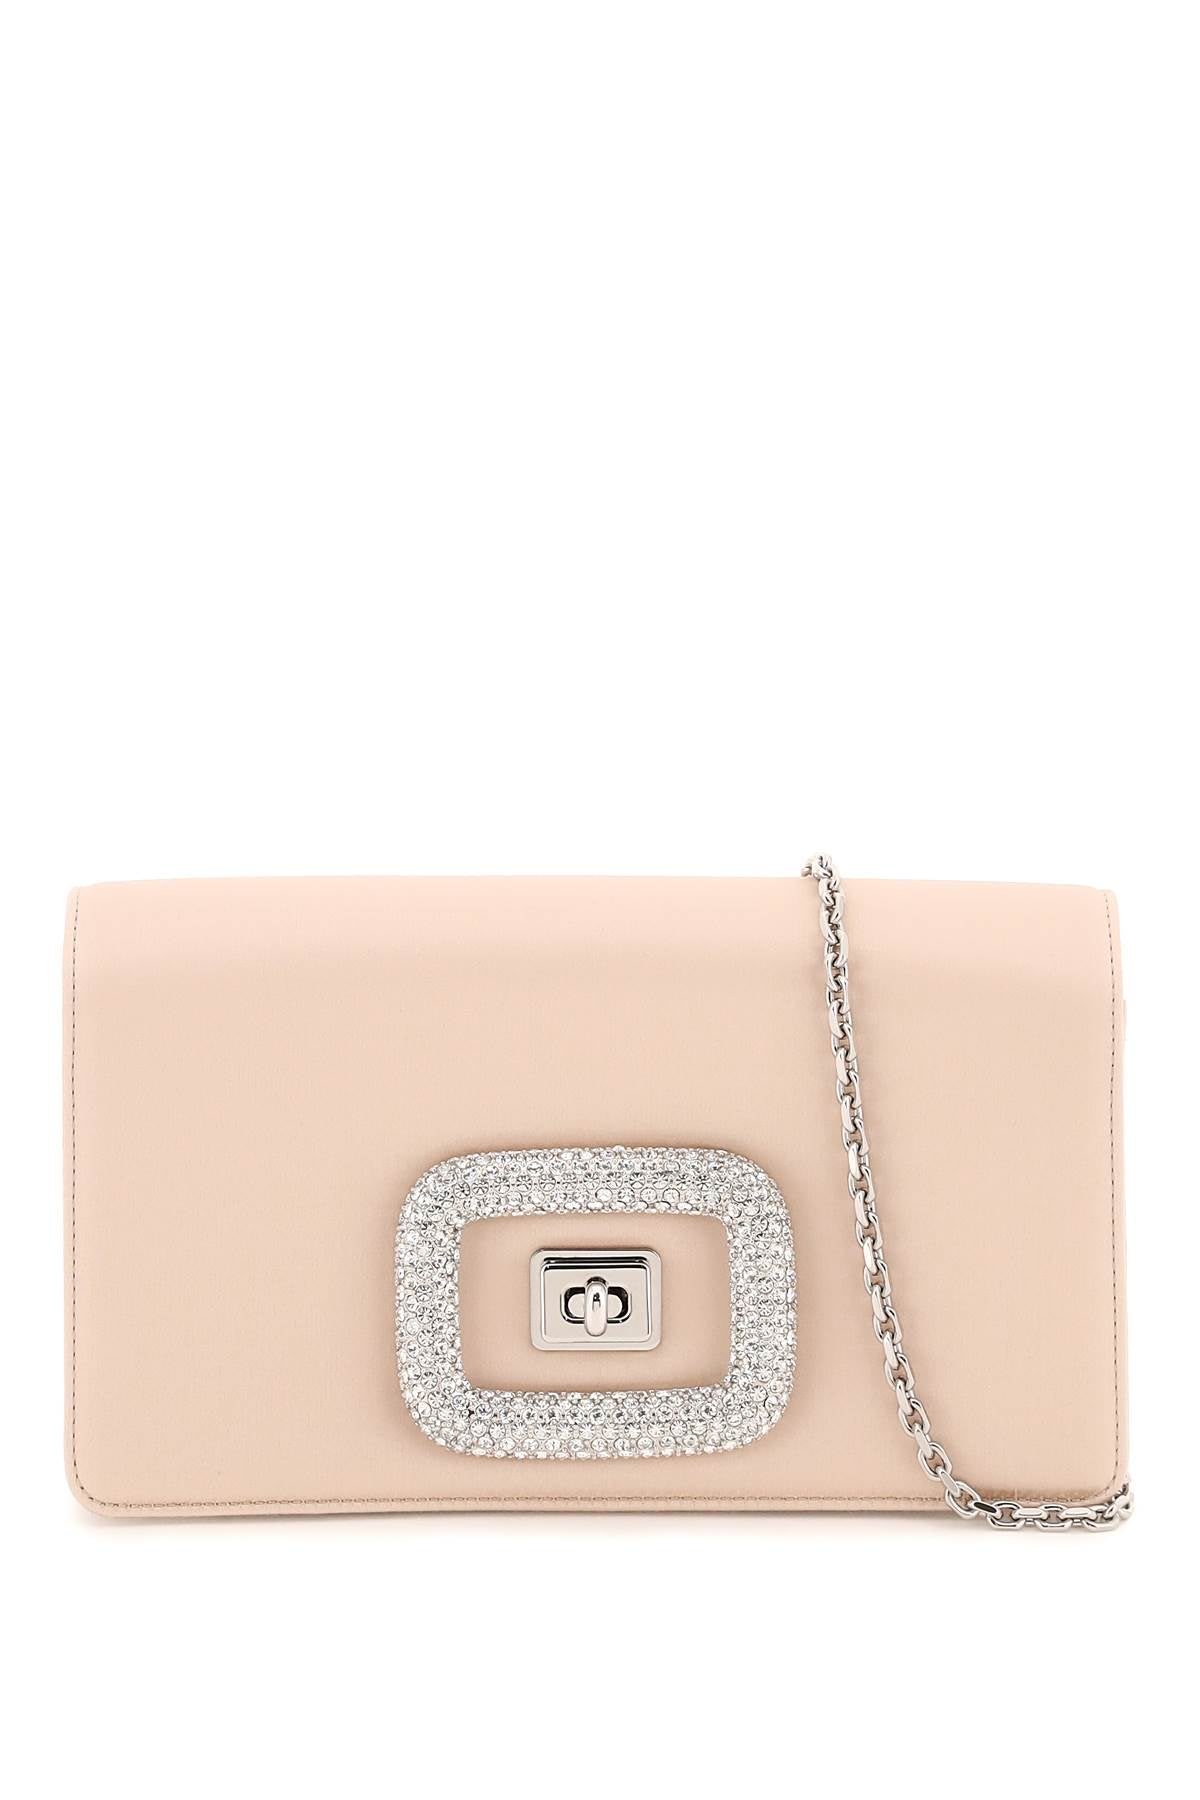 ROGER VIVIER Powder Pink Satin Clutch with Swivel Clasp and Chain Strap